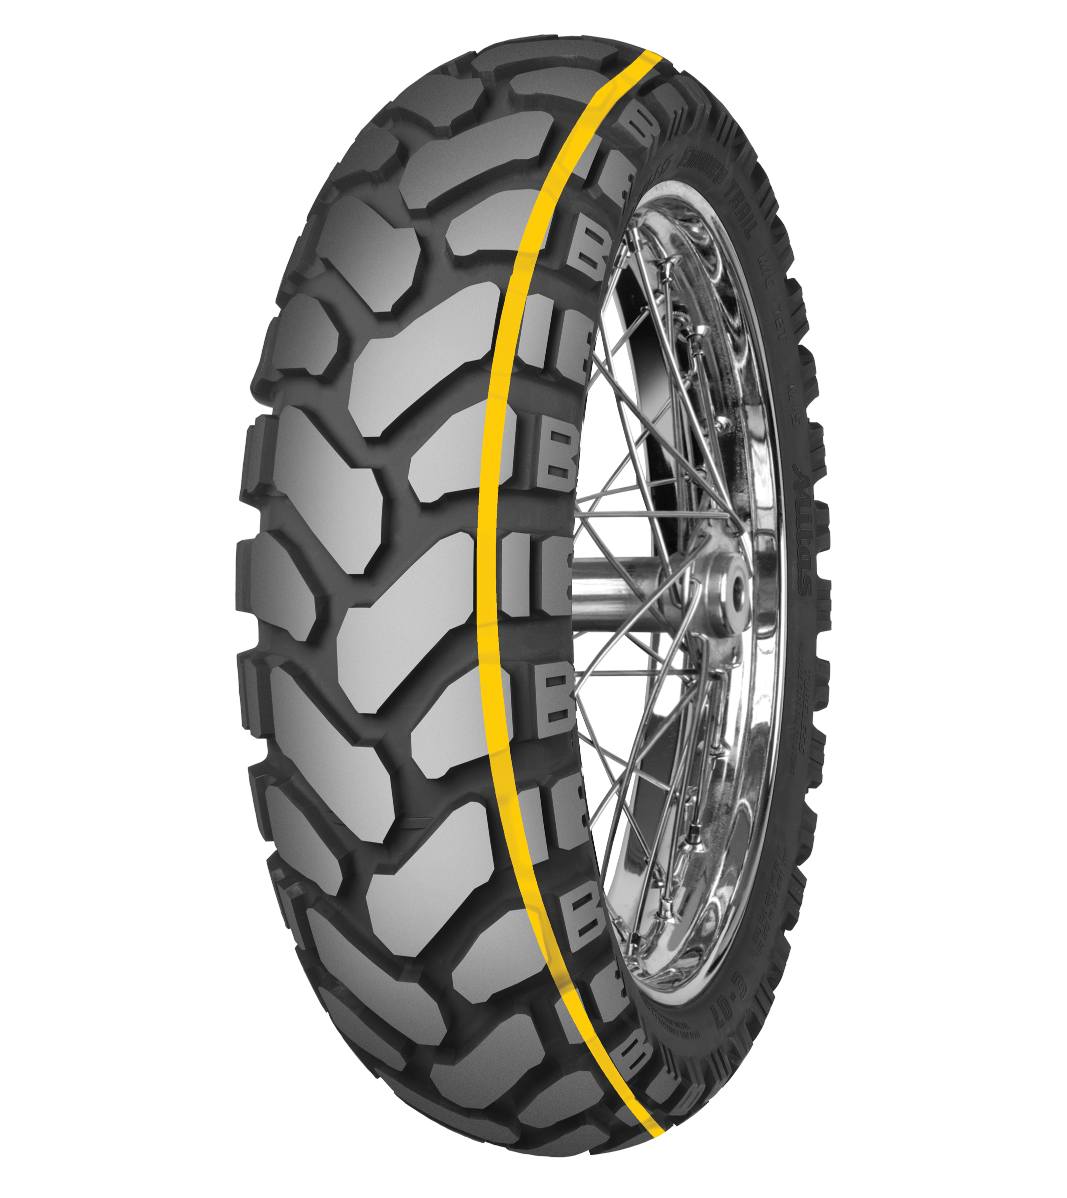 Mitas E-07+ ENDURO TRAIL 150/70B18 Trail ON Trail DAKAR 70T Yellow Tubeless Rear Tire, 224416, 150/70B18, Adventure Touring, E Series, E-07+ Enduro Trail, Rear, Trail, Trail ON, Tires - Imported and distributed in North & South America by Lindeco Genuine Powersports - Premier Powersports Equipment and Accessories for Motorcycle Enthusiasts, Professional Riders and Dealers.